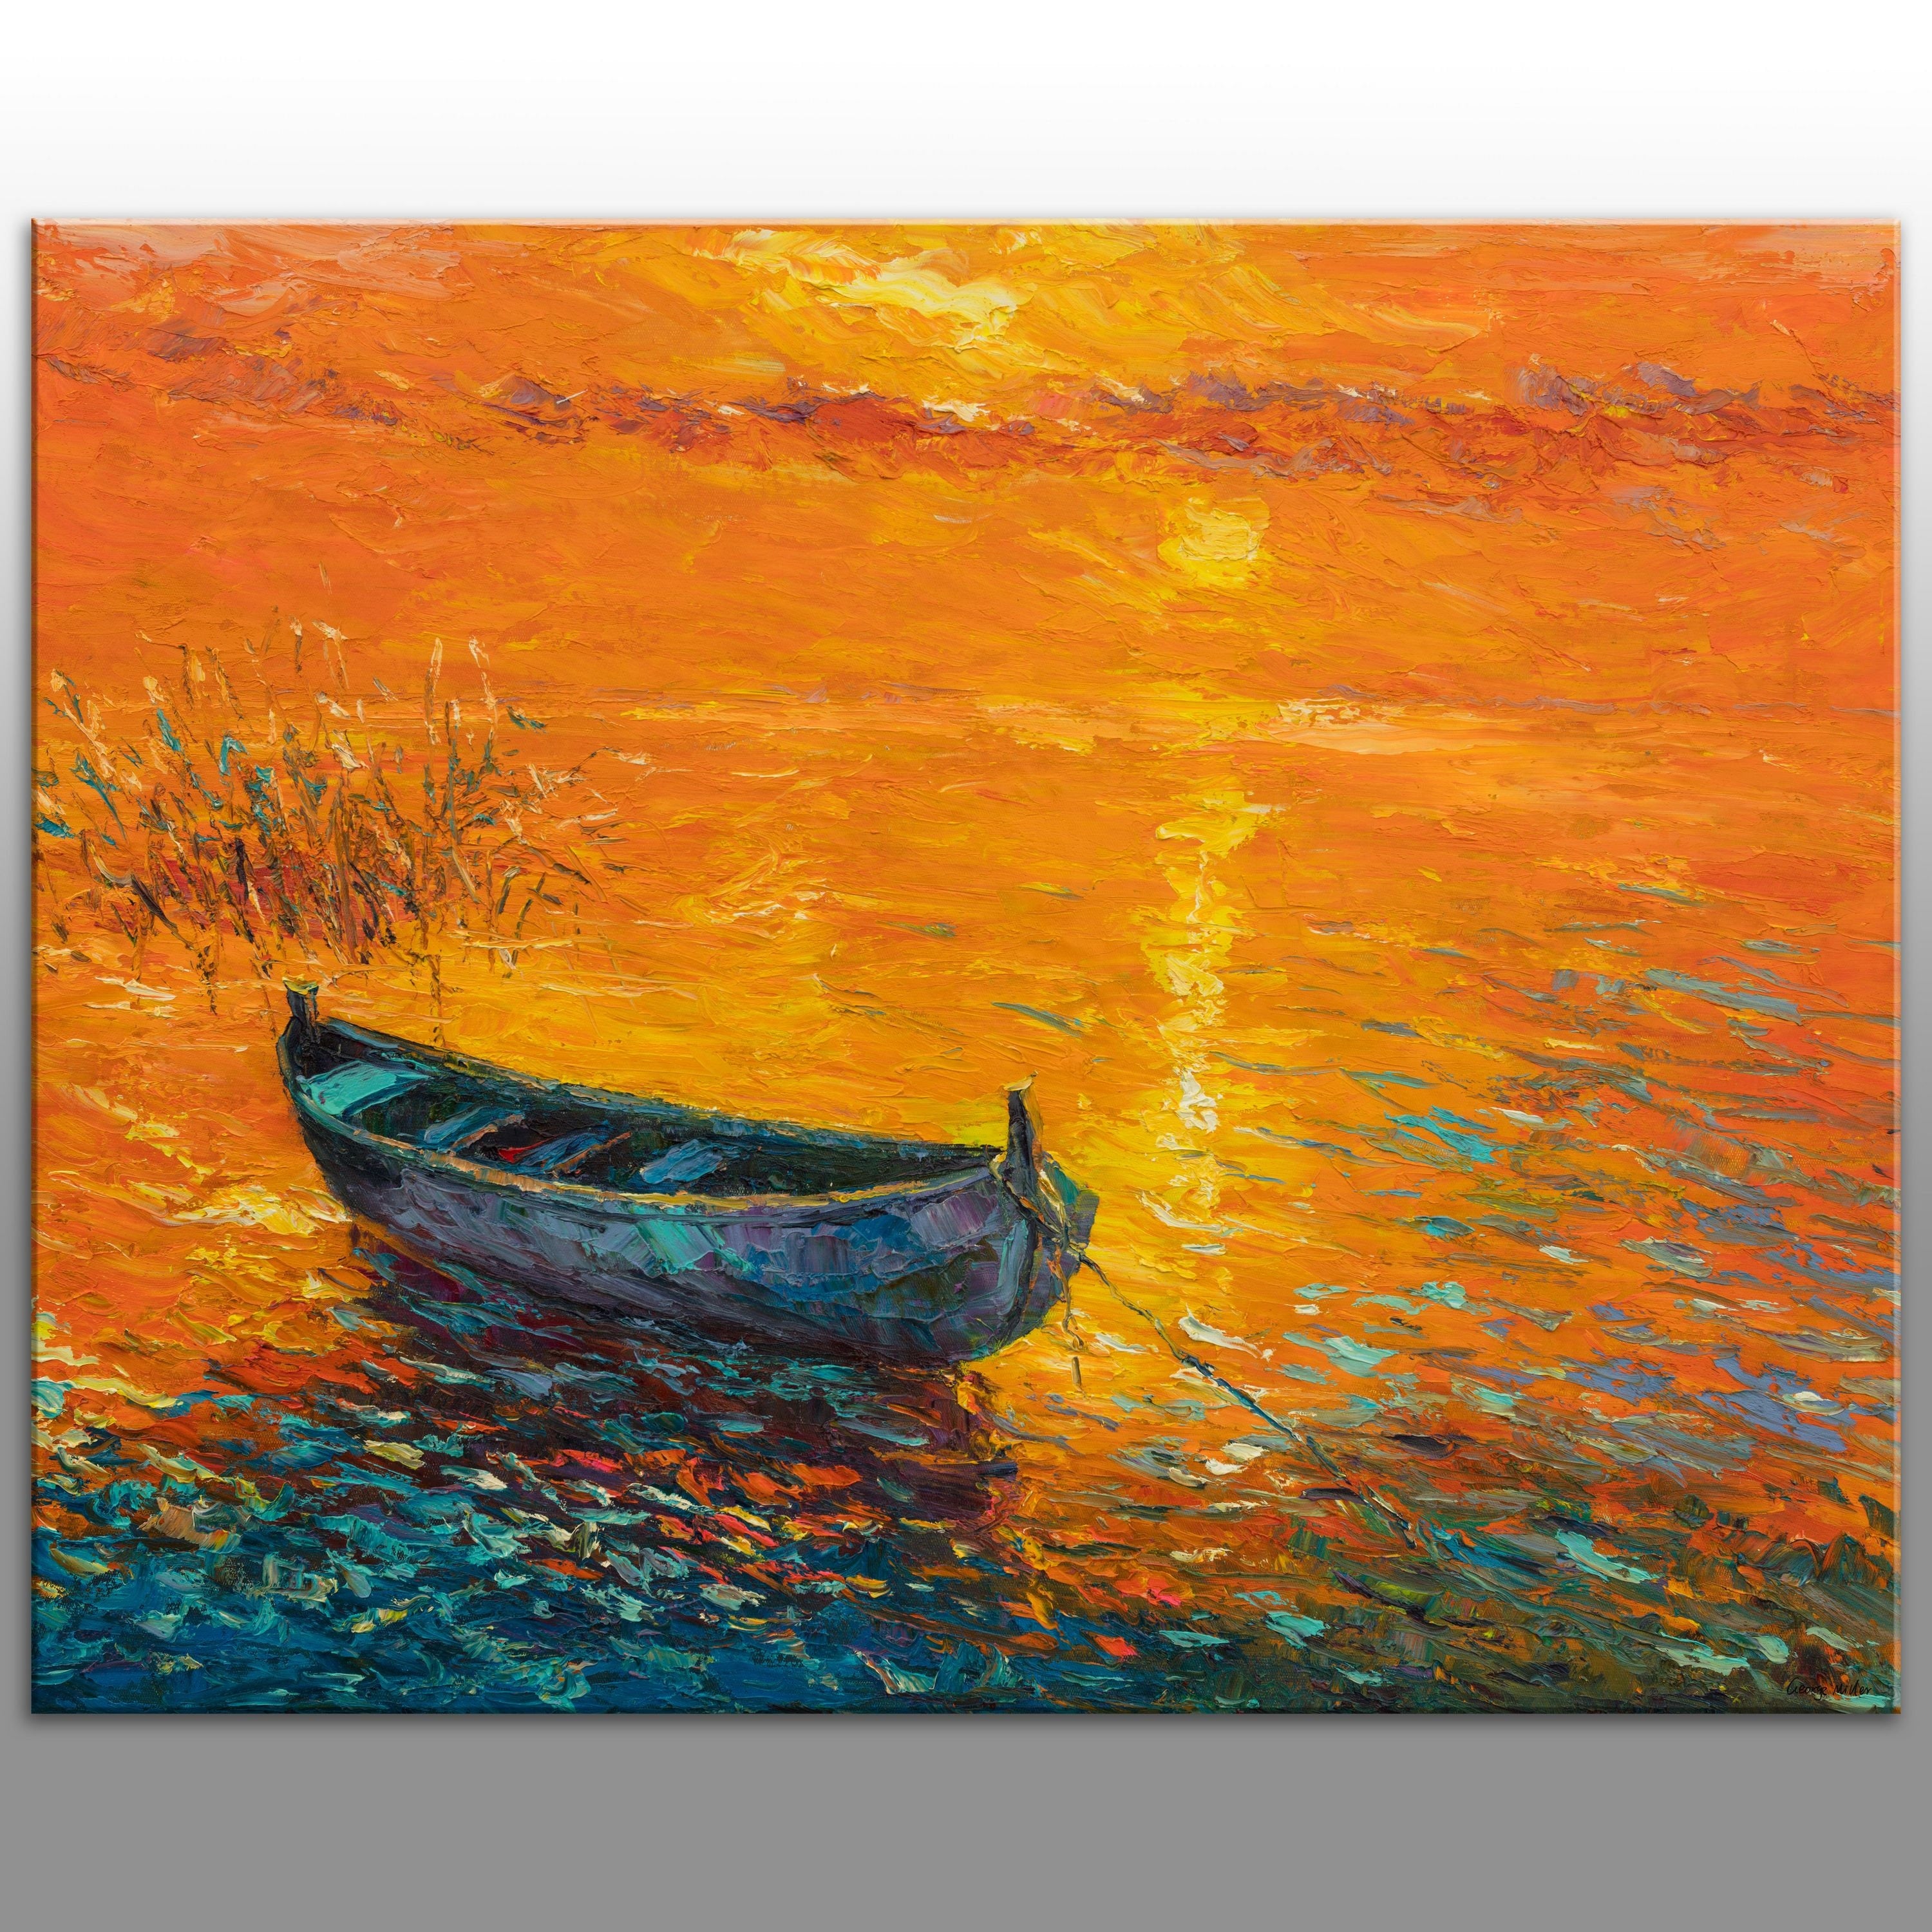 Oil Painting Seascape: Large Wall Art | Fishing Boat Sunset | Contempo